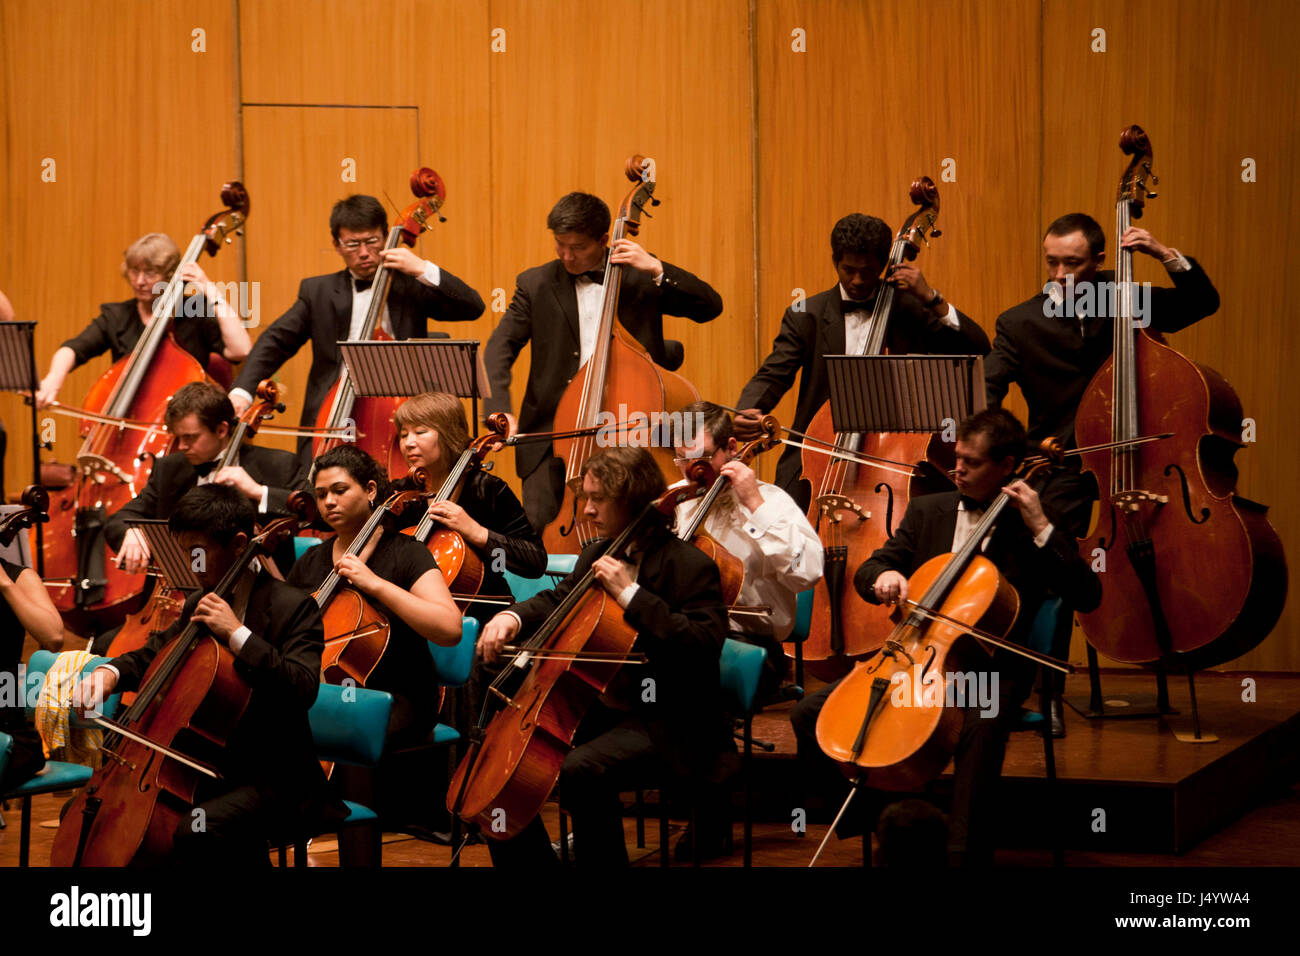 Orchester im National Centre for the Performing Arts, mumbai maharashtra, indien, asien Stockfoto